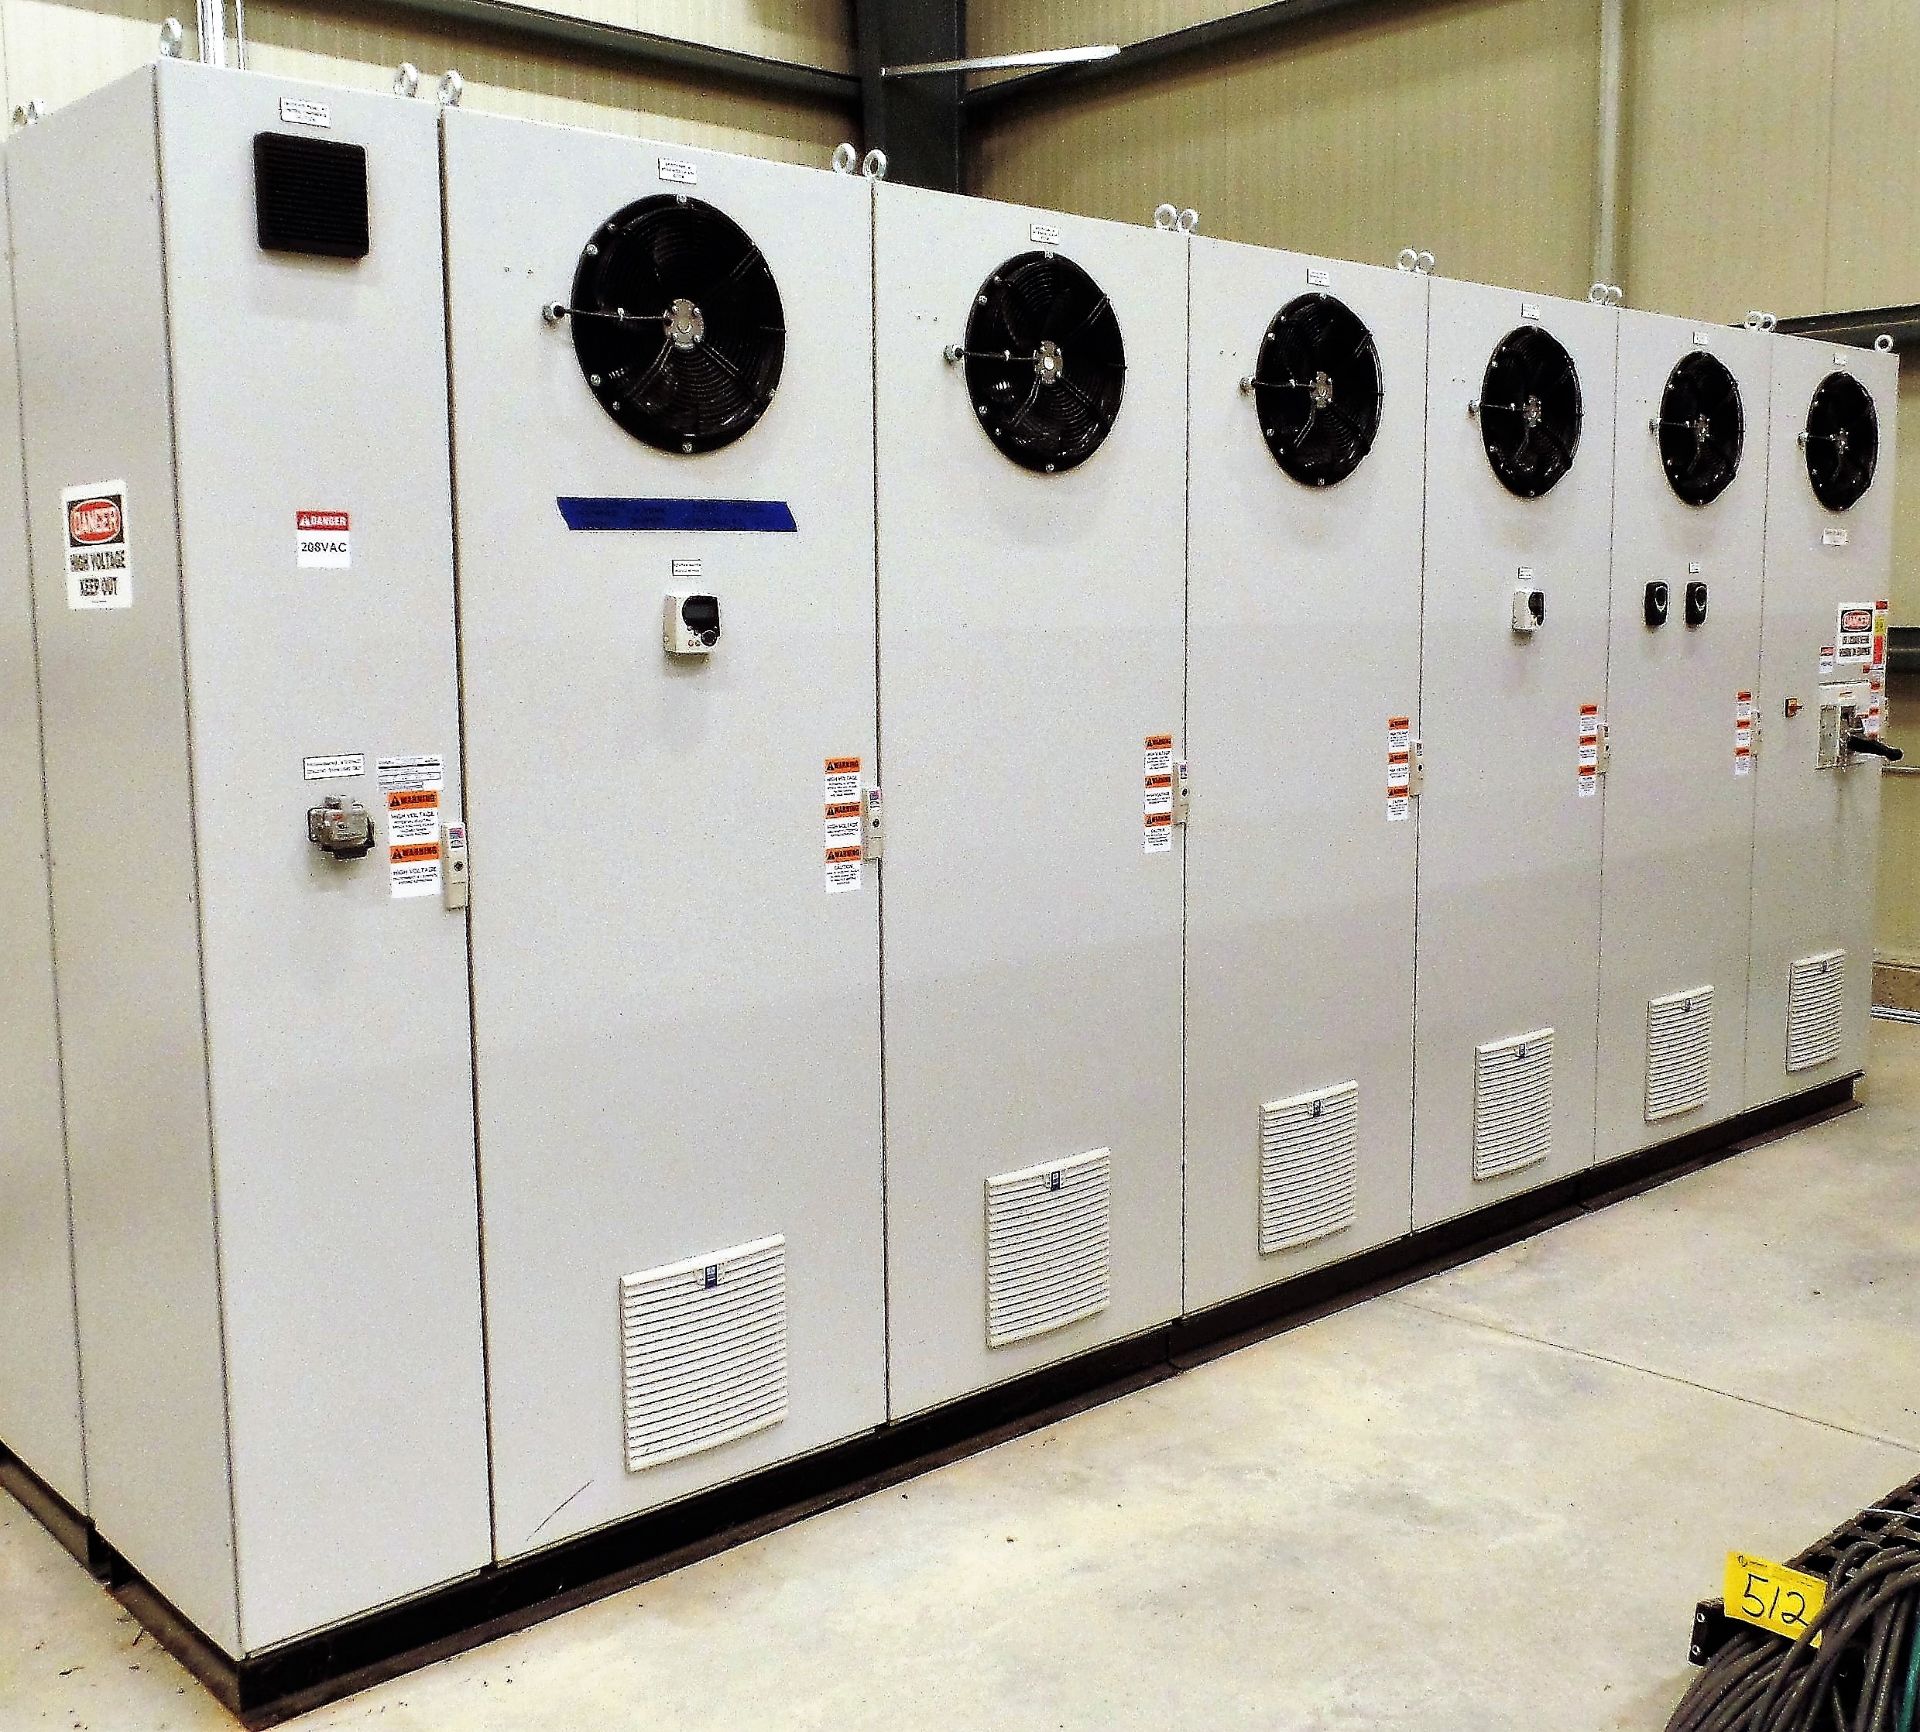 (7) CONJOINED CABINETS W/ (1) EMERSON CTLR 0151 PHASE 1 CONTROLLER, MODEL ECOP12061-01, S/N 12061-